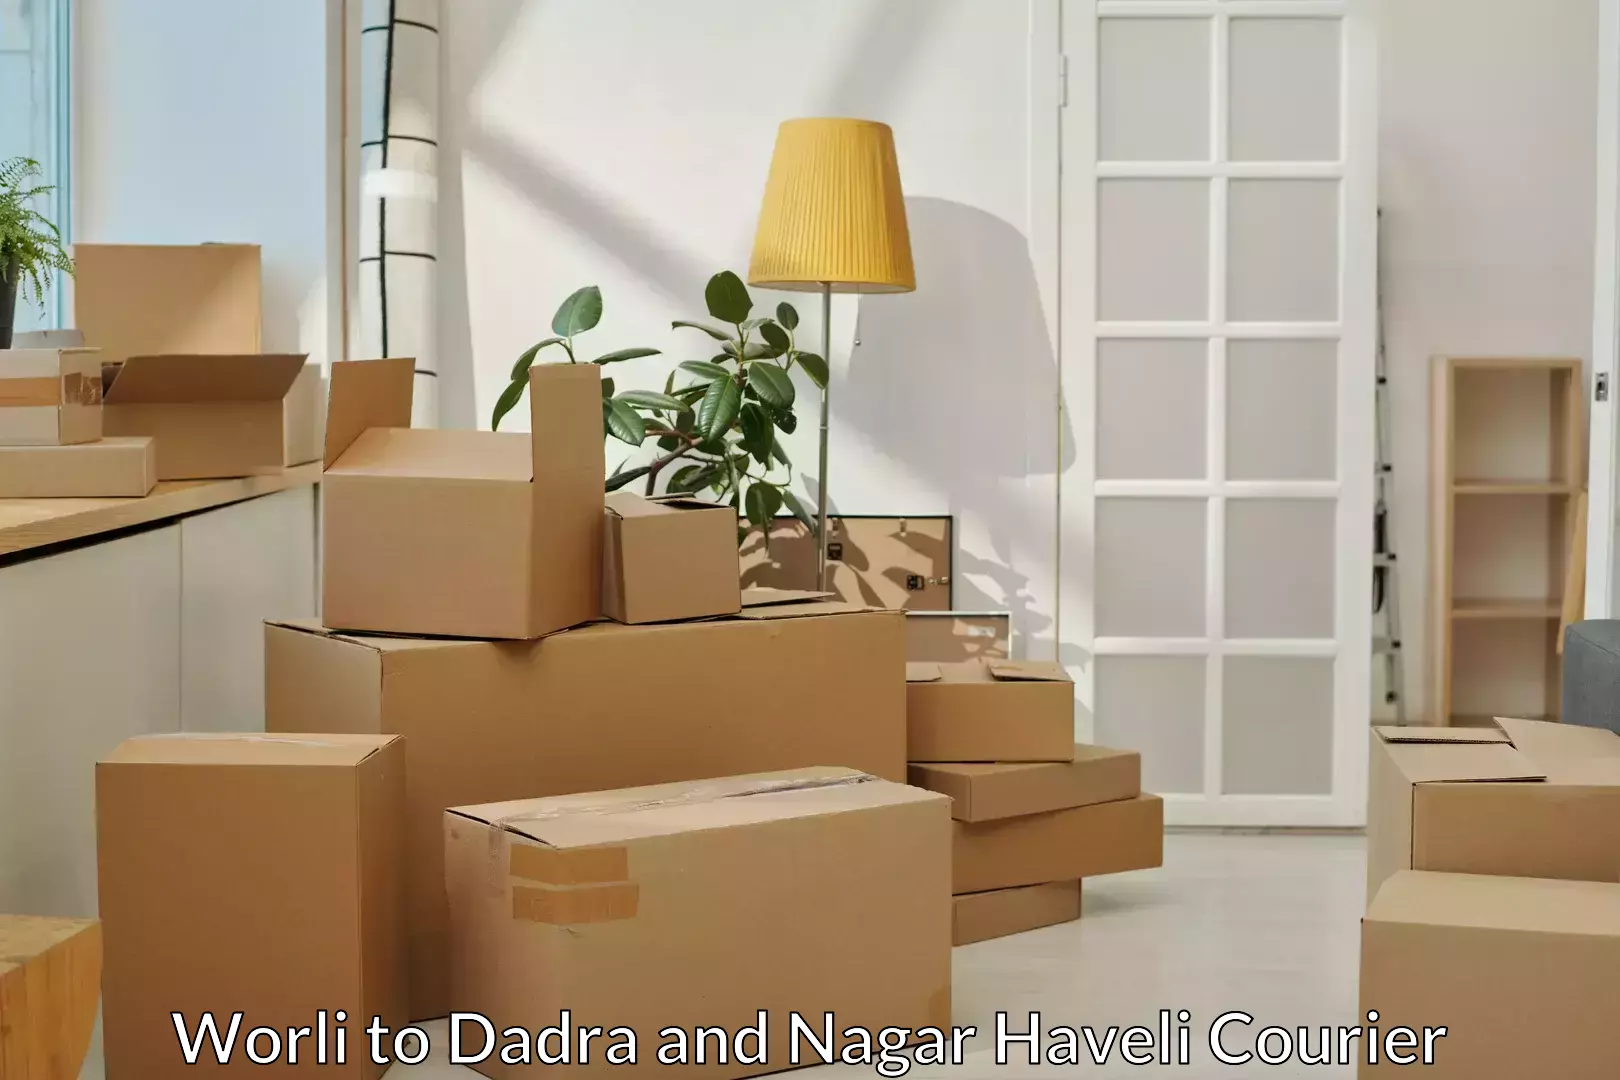 Trusted relocation services Worli to Dadra and Nagar Haveli